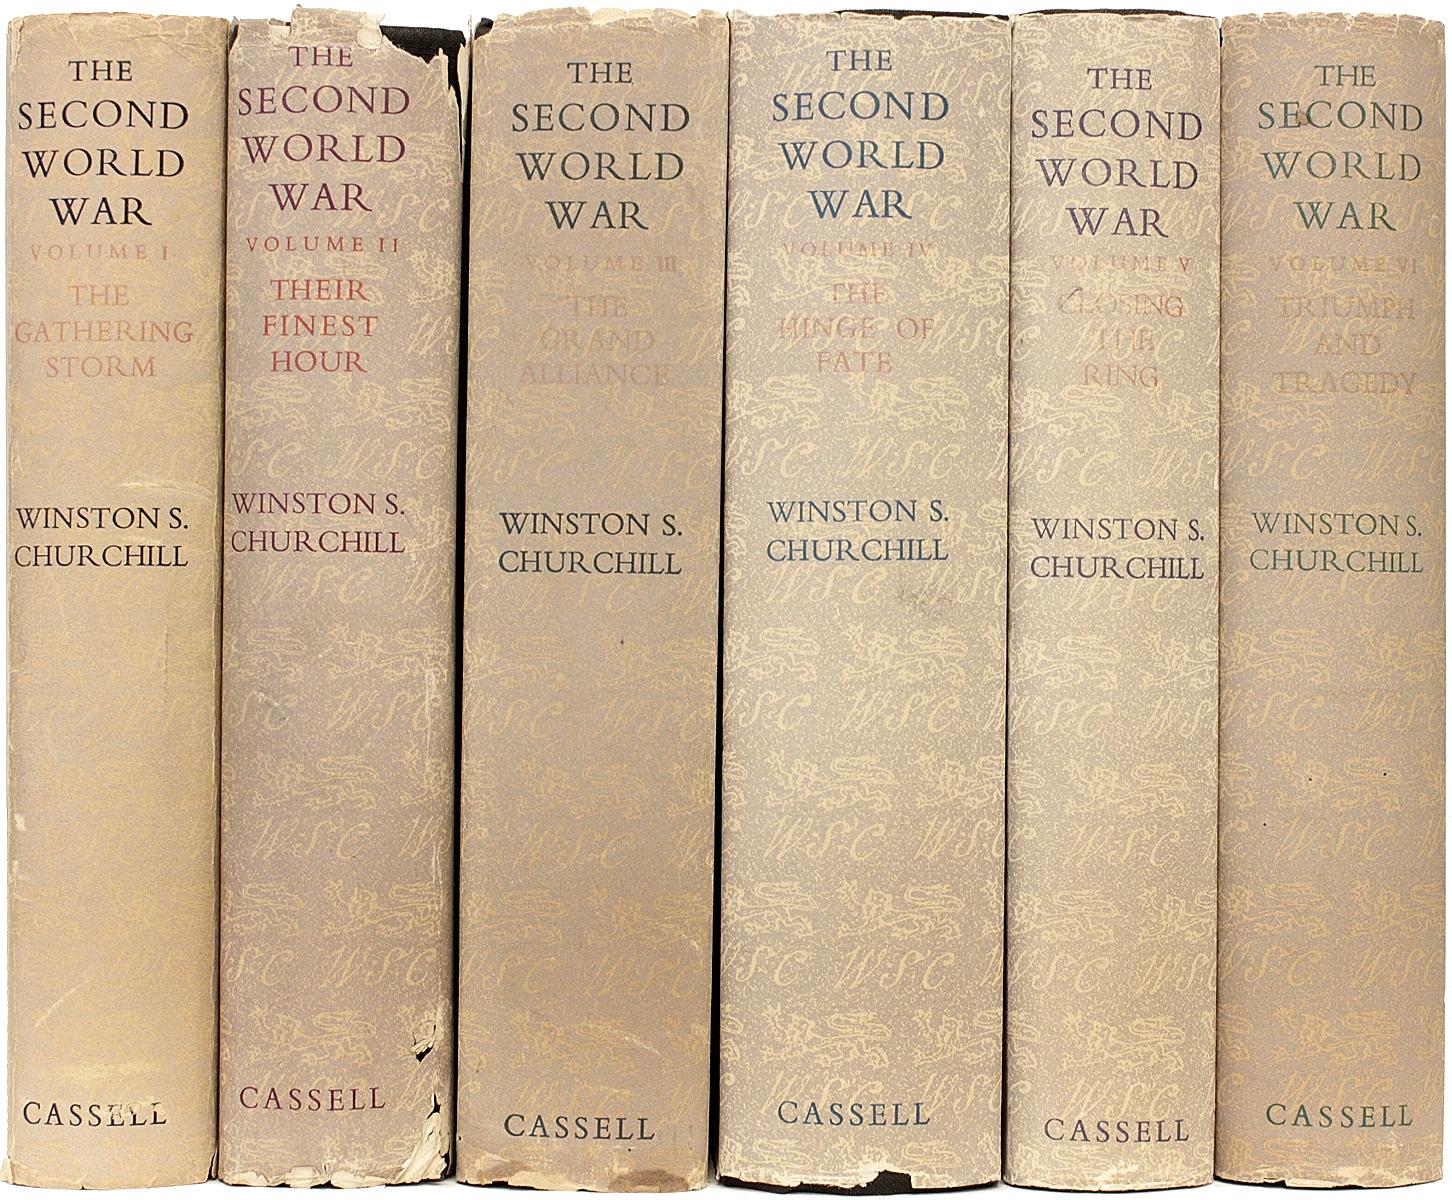 Author: Churchill, Winston

Title: The Second World War.

Publisher: London: Cassell & Co., Ltd., 1948-54.

Description: All First Editions with the DJ's. 6 volumes, publisher's original gilt stamped black cloth, illustrated, fold-out